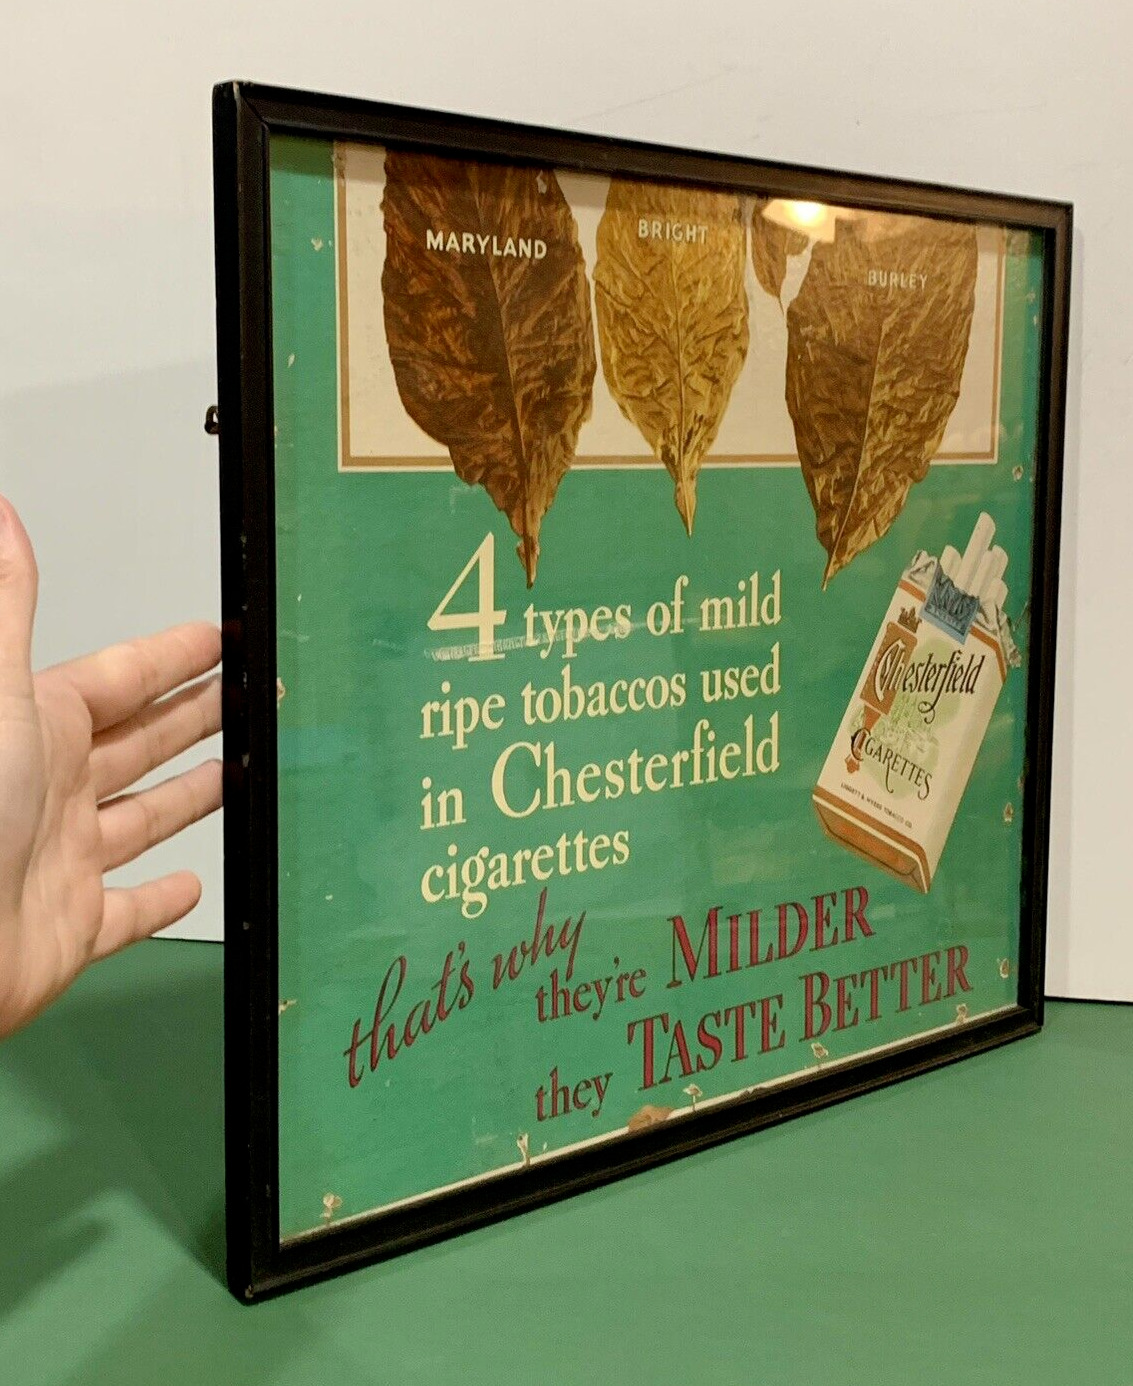 VTG 1940's Chesterfield Cigarettes CARDBOARD SIGN 4 Types of Mild Tobacco poster